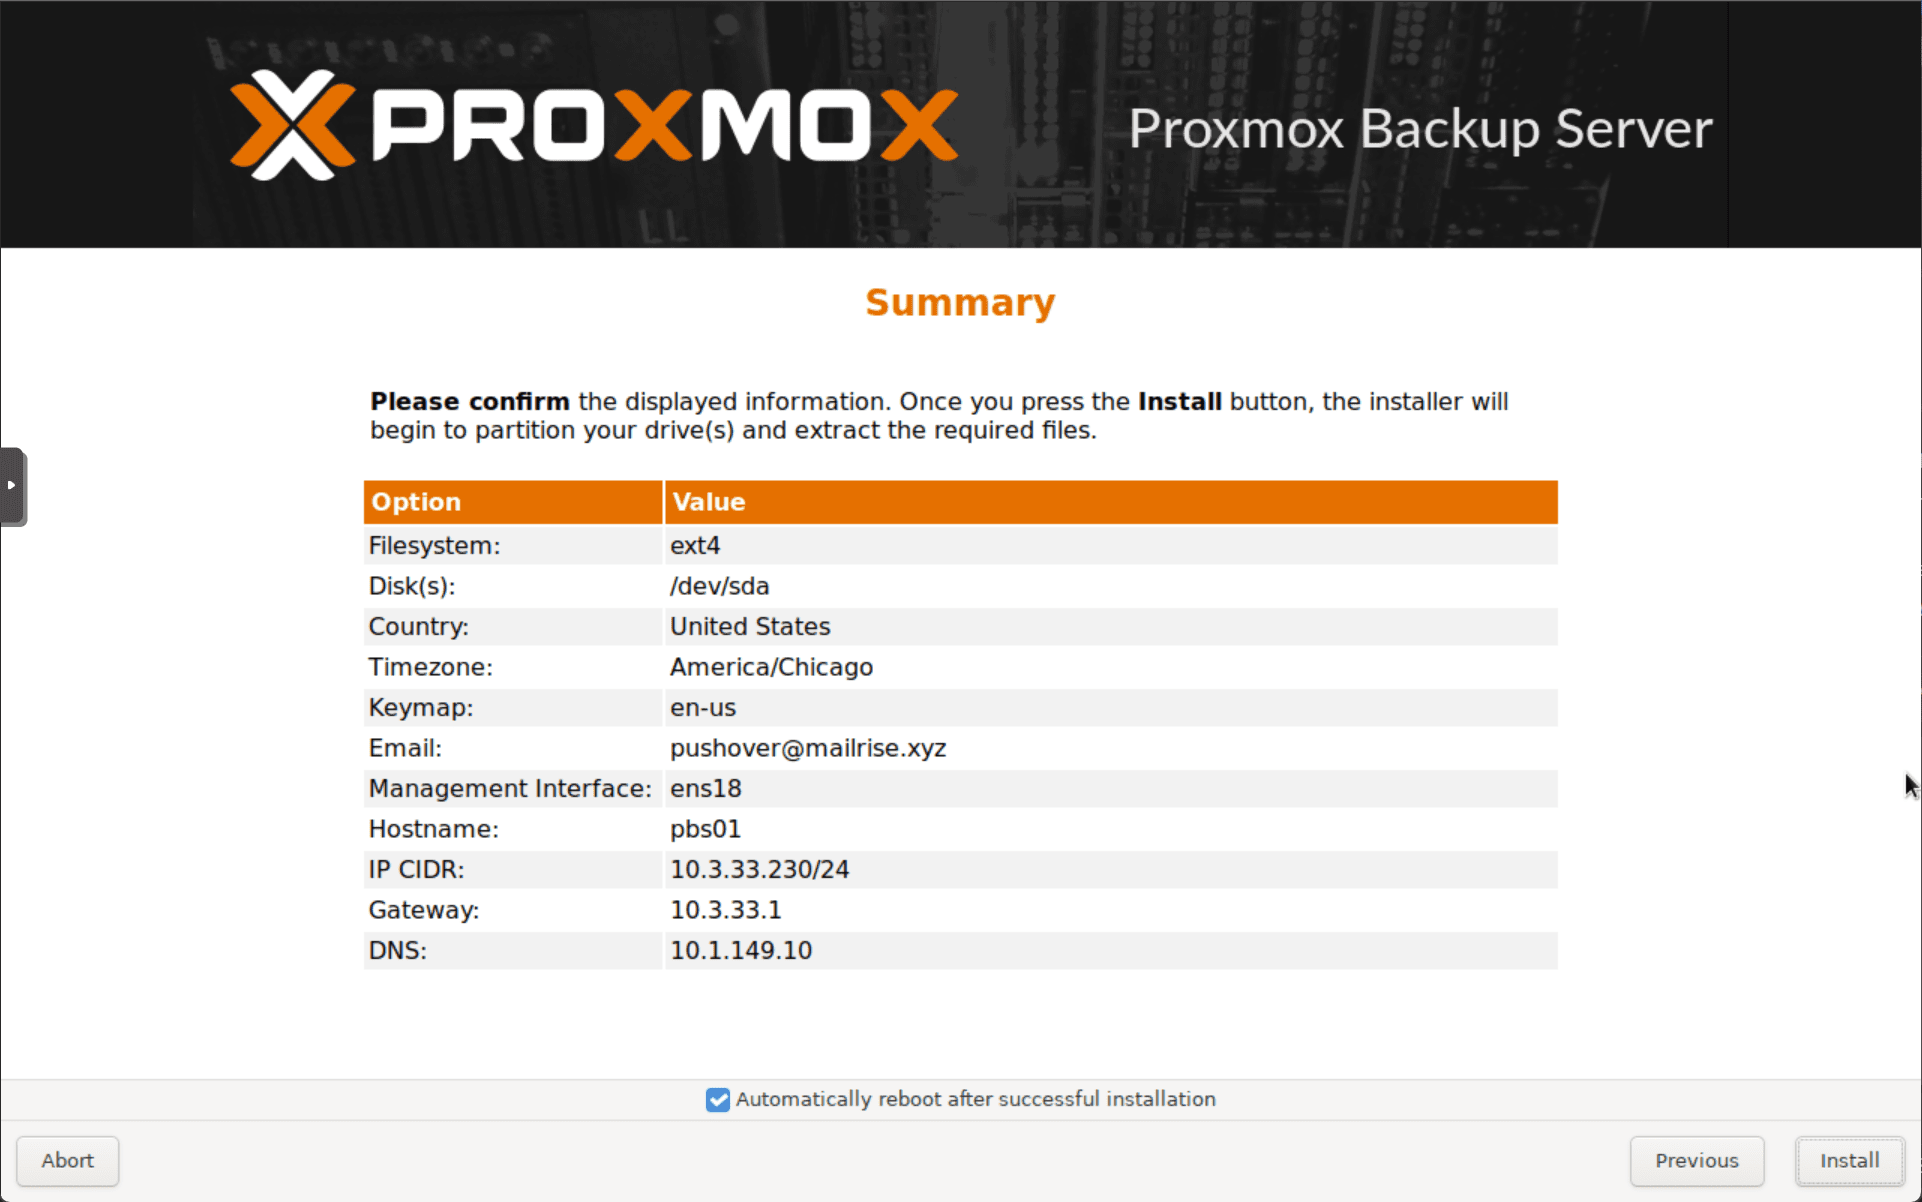 Summary screen for the installation process with proxmox backup server